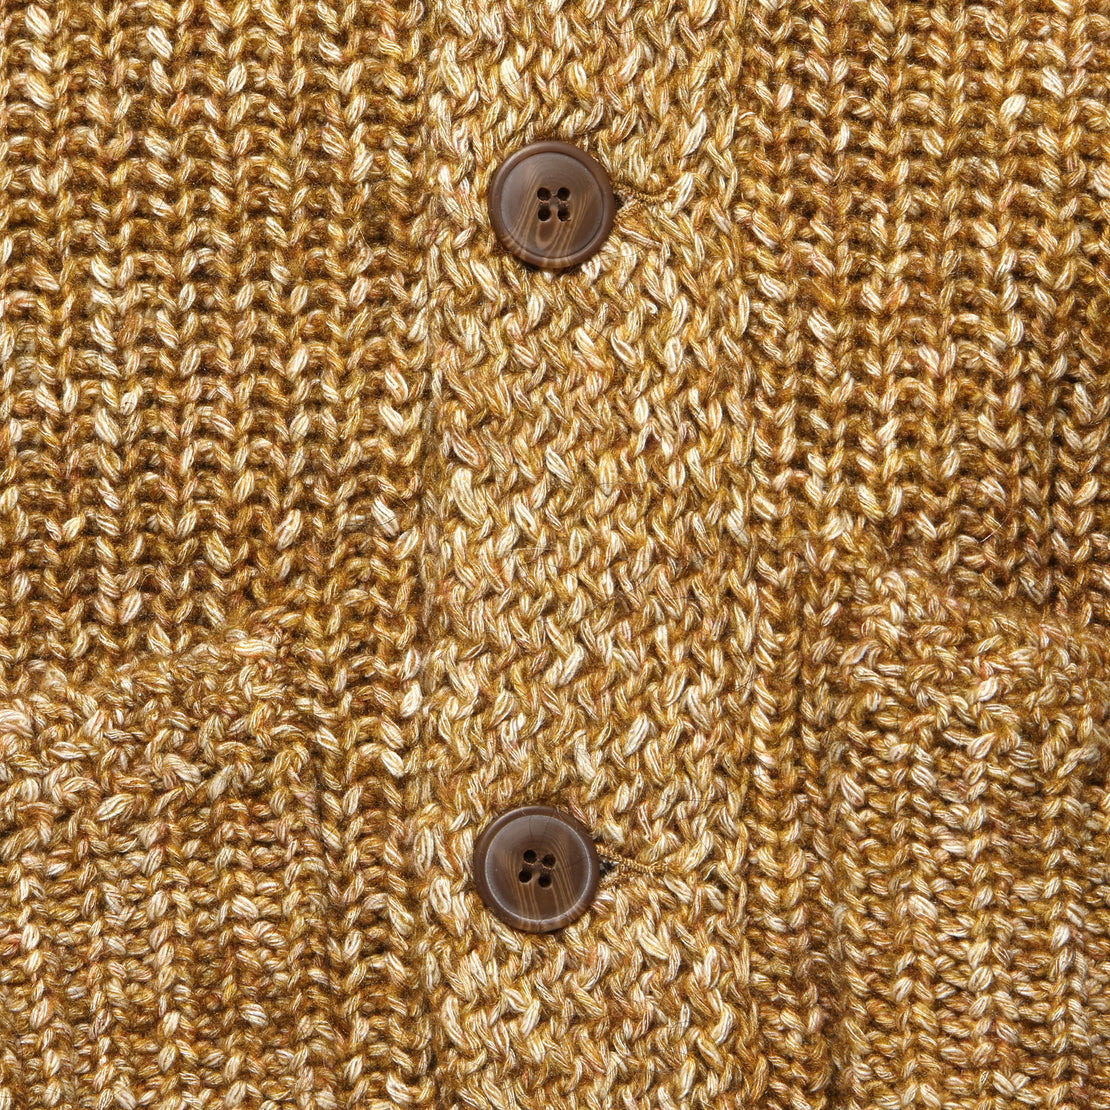 Bradford Shawl Cardigan - Biscuit - Grayers - STAG Provisions - Tops - Sweater